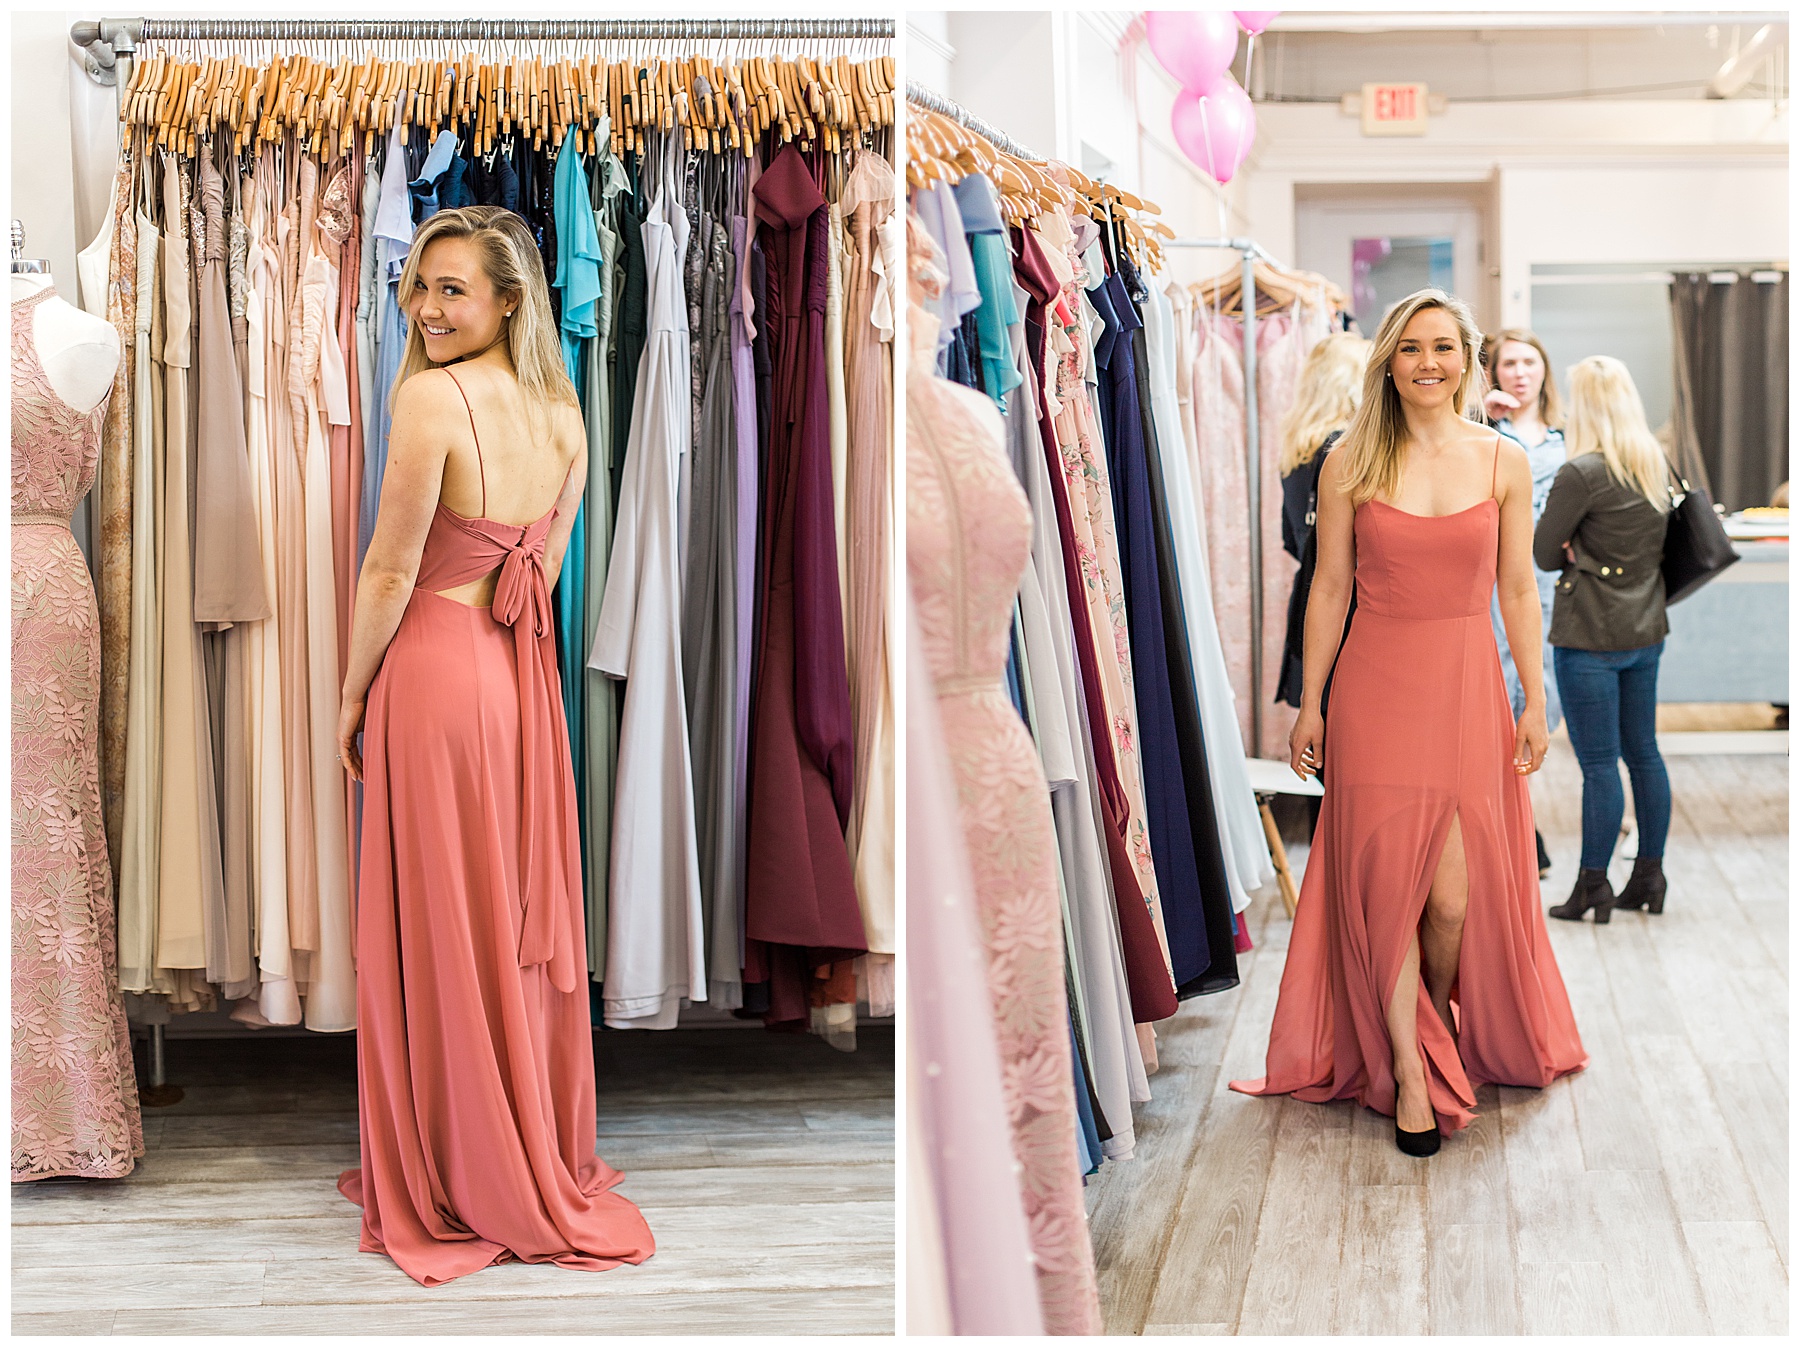 Bella_Bridesmaids_Westport_Connecticut_Kristina_Staal_Photography_Trying_on_bridesmaids_Dresses.jpg